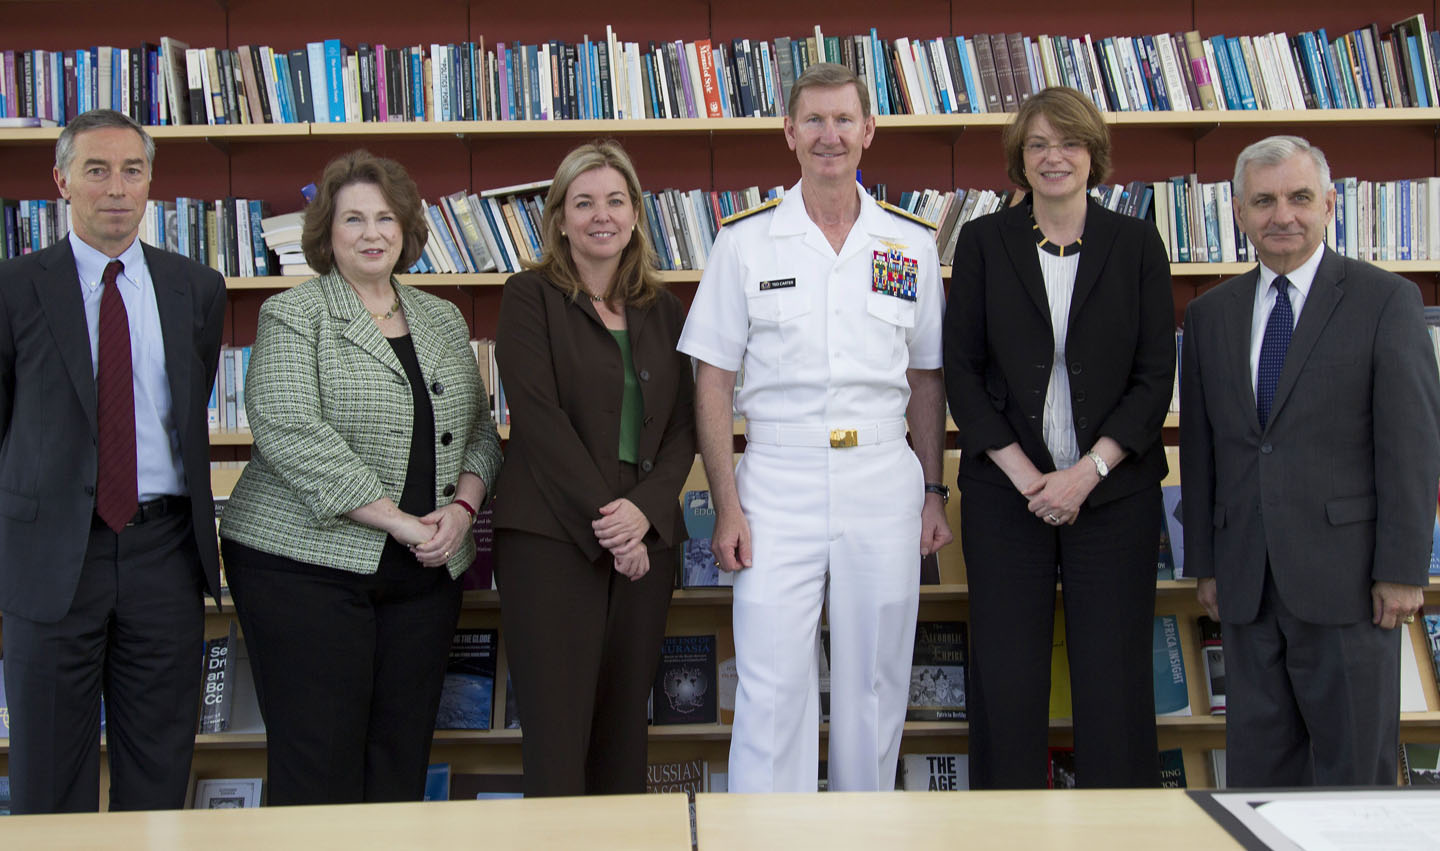 At the signing: From left, Richard Locke, Watson Institute director; Mary Ann Peters, provost of the Naval War College; Vicki Colvin, provost-elect at Brown; Rear Admiral Carter; President Paxson; Sen. Jack Reed.